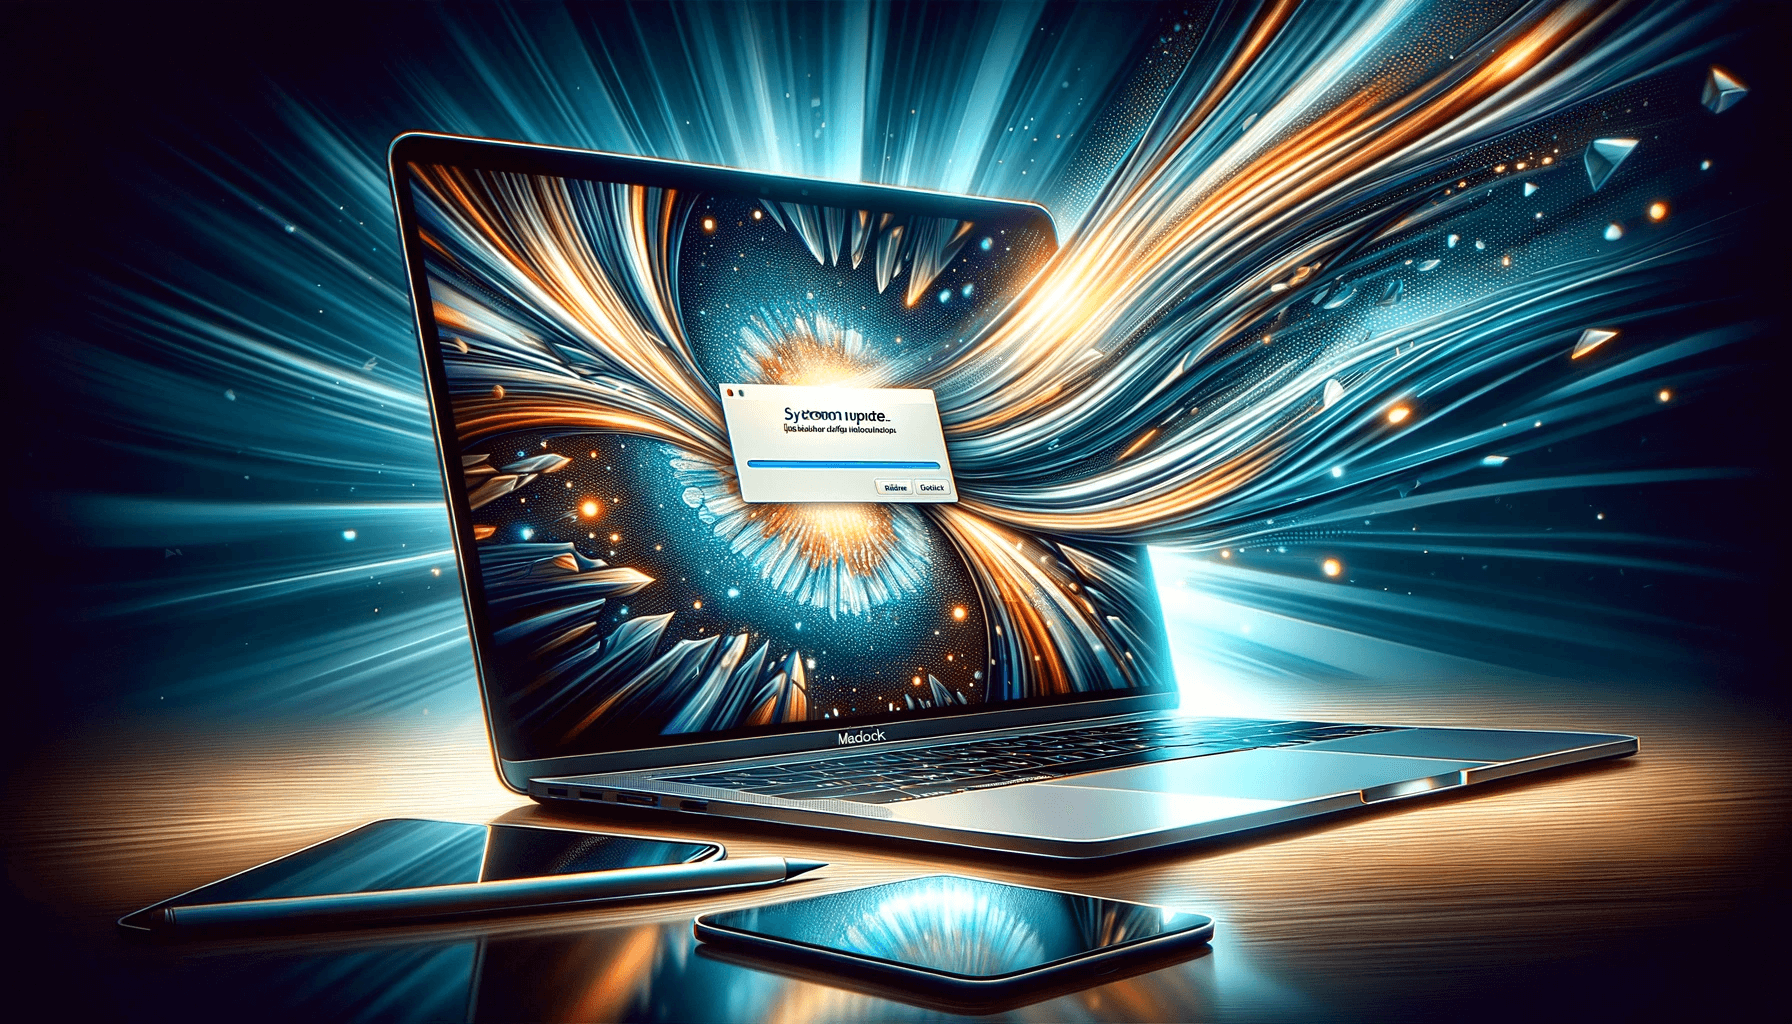 DALL·E 2023 11 23 16.26.20 A stunning digital illustration of a MacBook undergoing an update. The MacBook is depicted in high detail open on a desk with its screen vividly sho